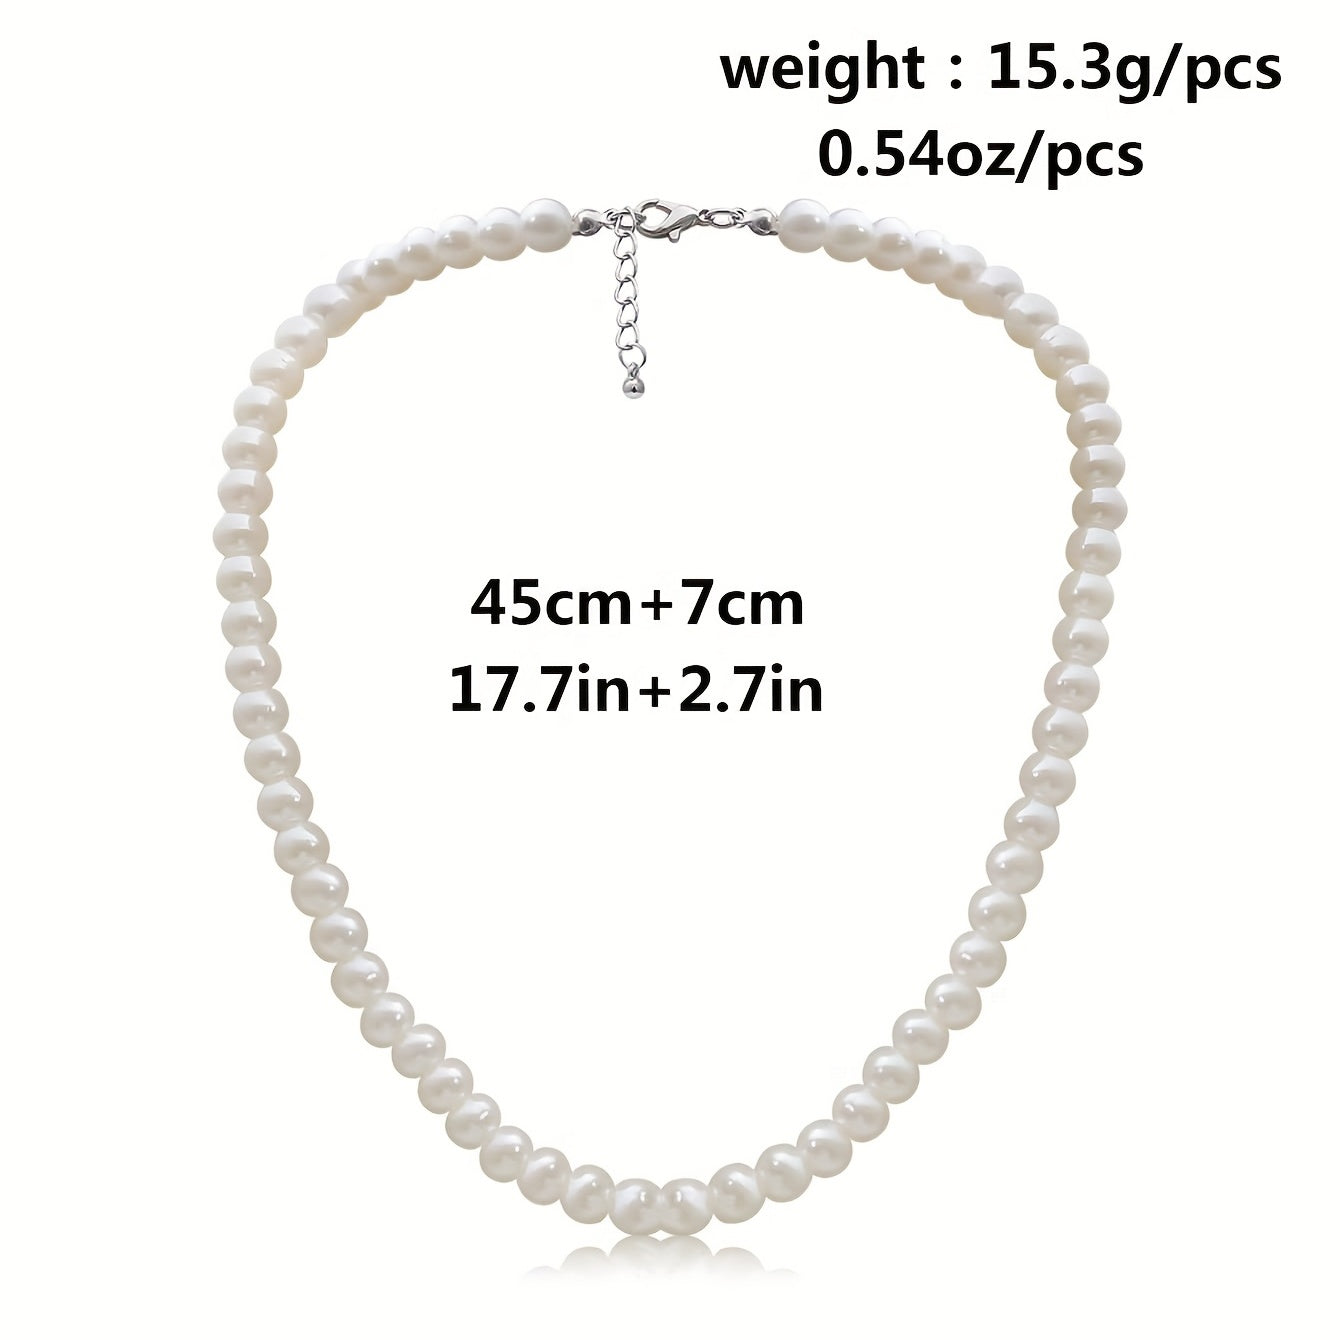 Elegant & Stylish Pearl Necklace - Perfect for Women's Fashion Accessories!